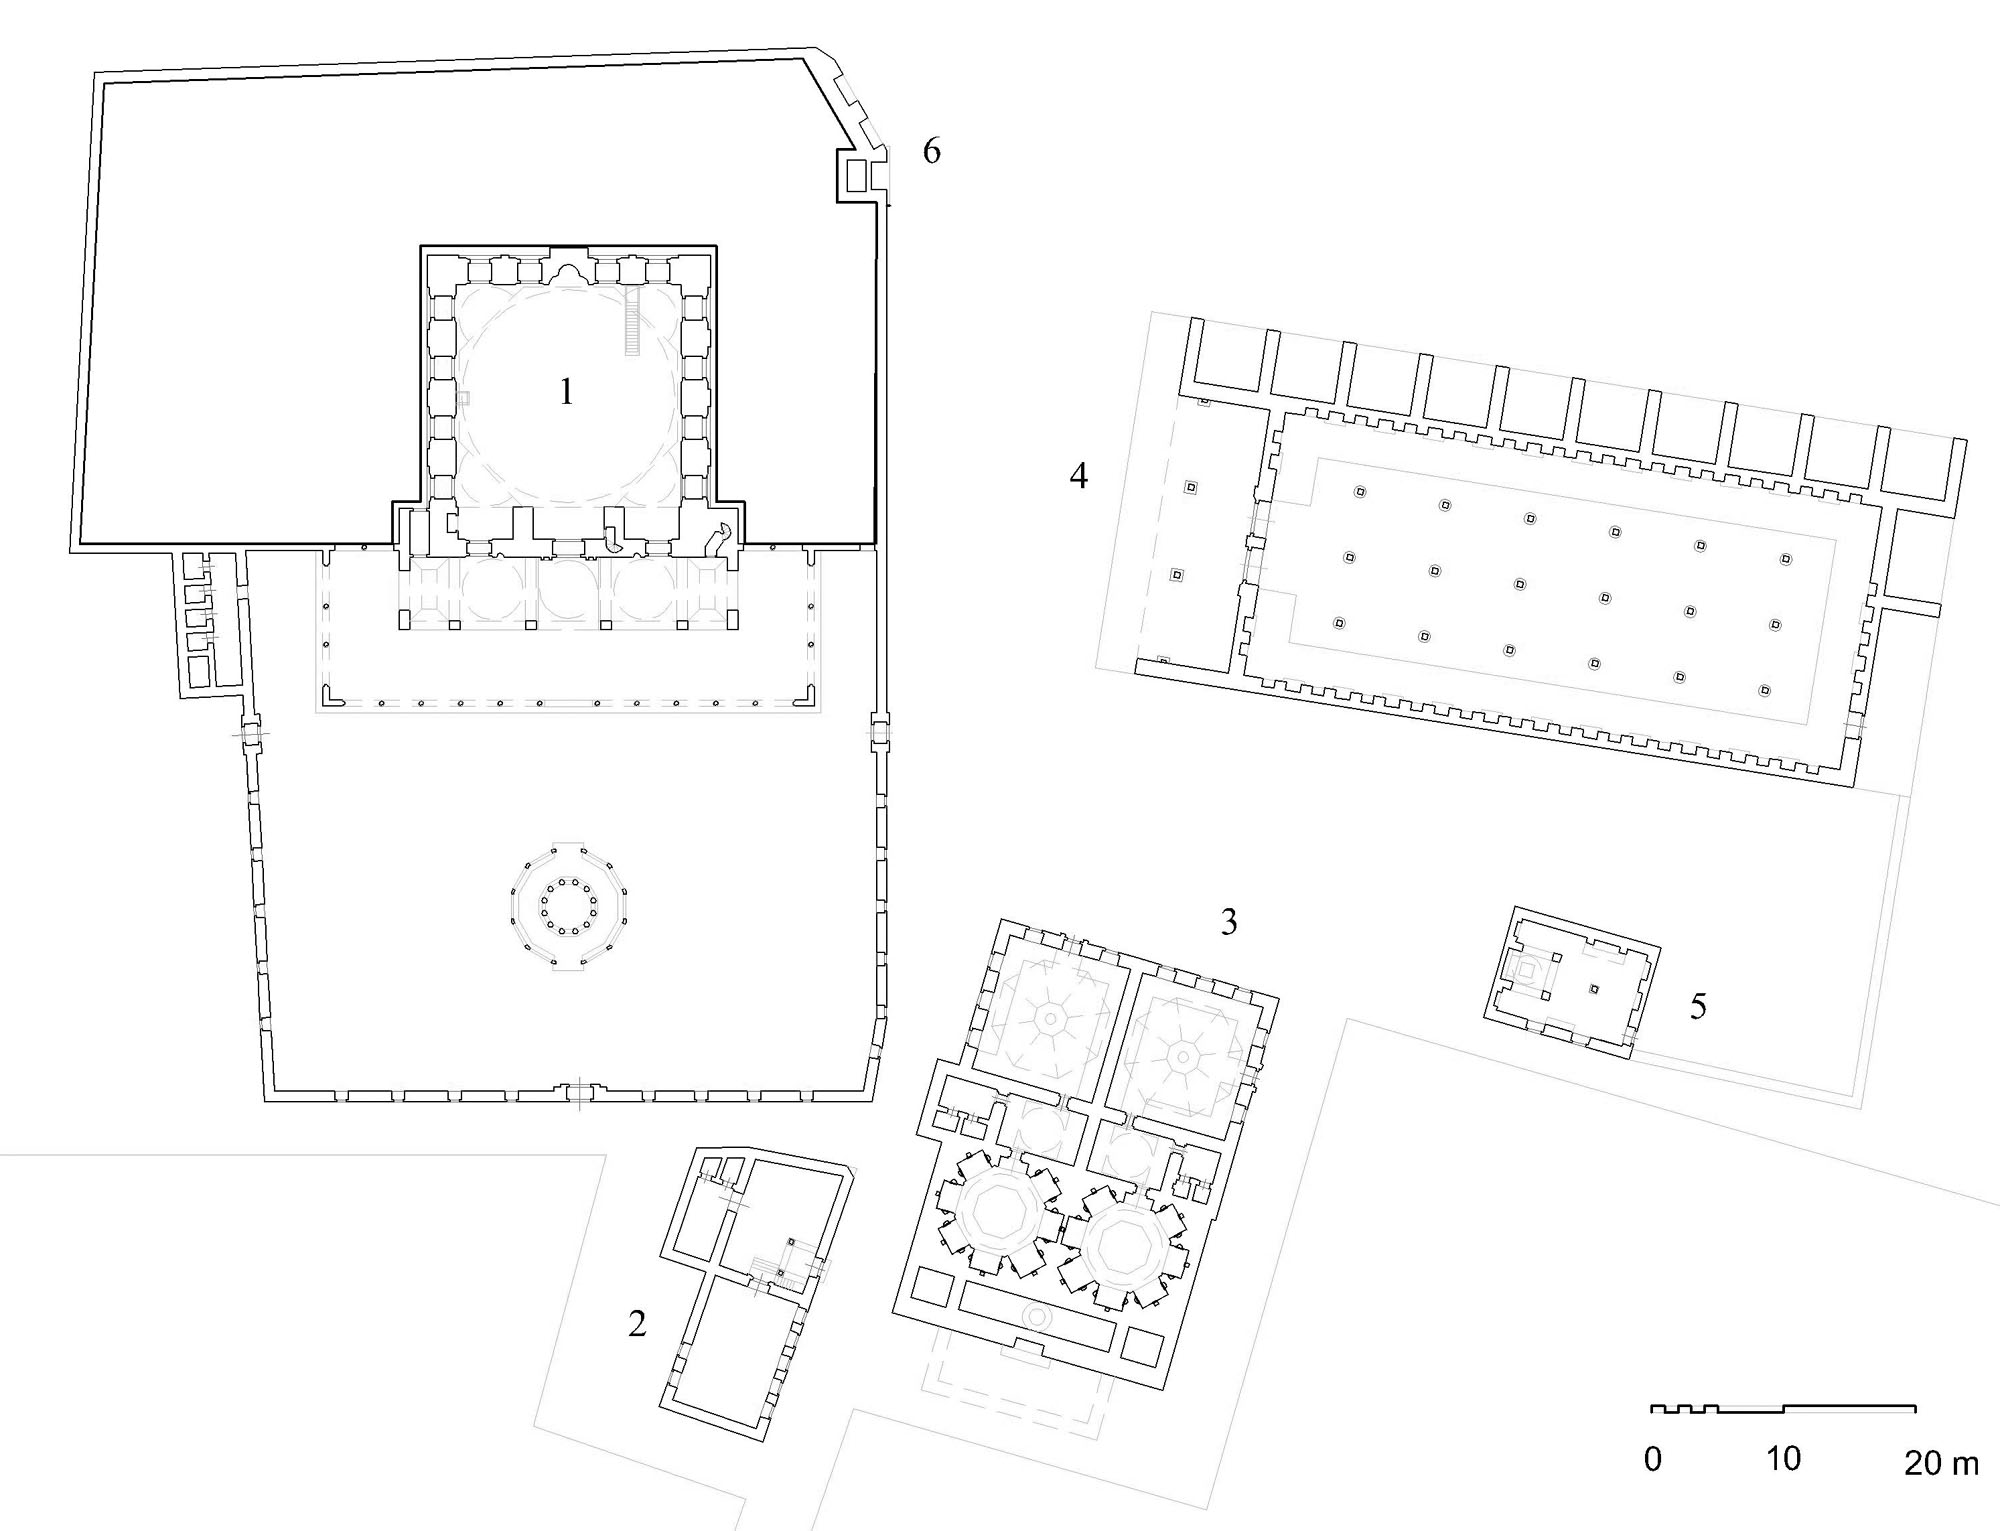  Pertev Mehmet Paşa Külliyesi - Floor plan of complex showing (1) mosque, (2) elementary school, (3) double bath, (4) caravanserai with shops, (5) hospice, (6) reservoir with public fountains. DWG file in AutoCAD 2000 format. Click the download button to download a zipped file containing the .dwg file.